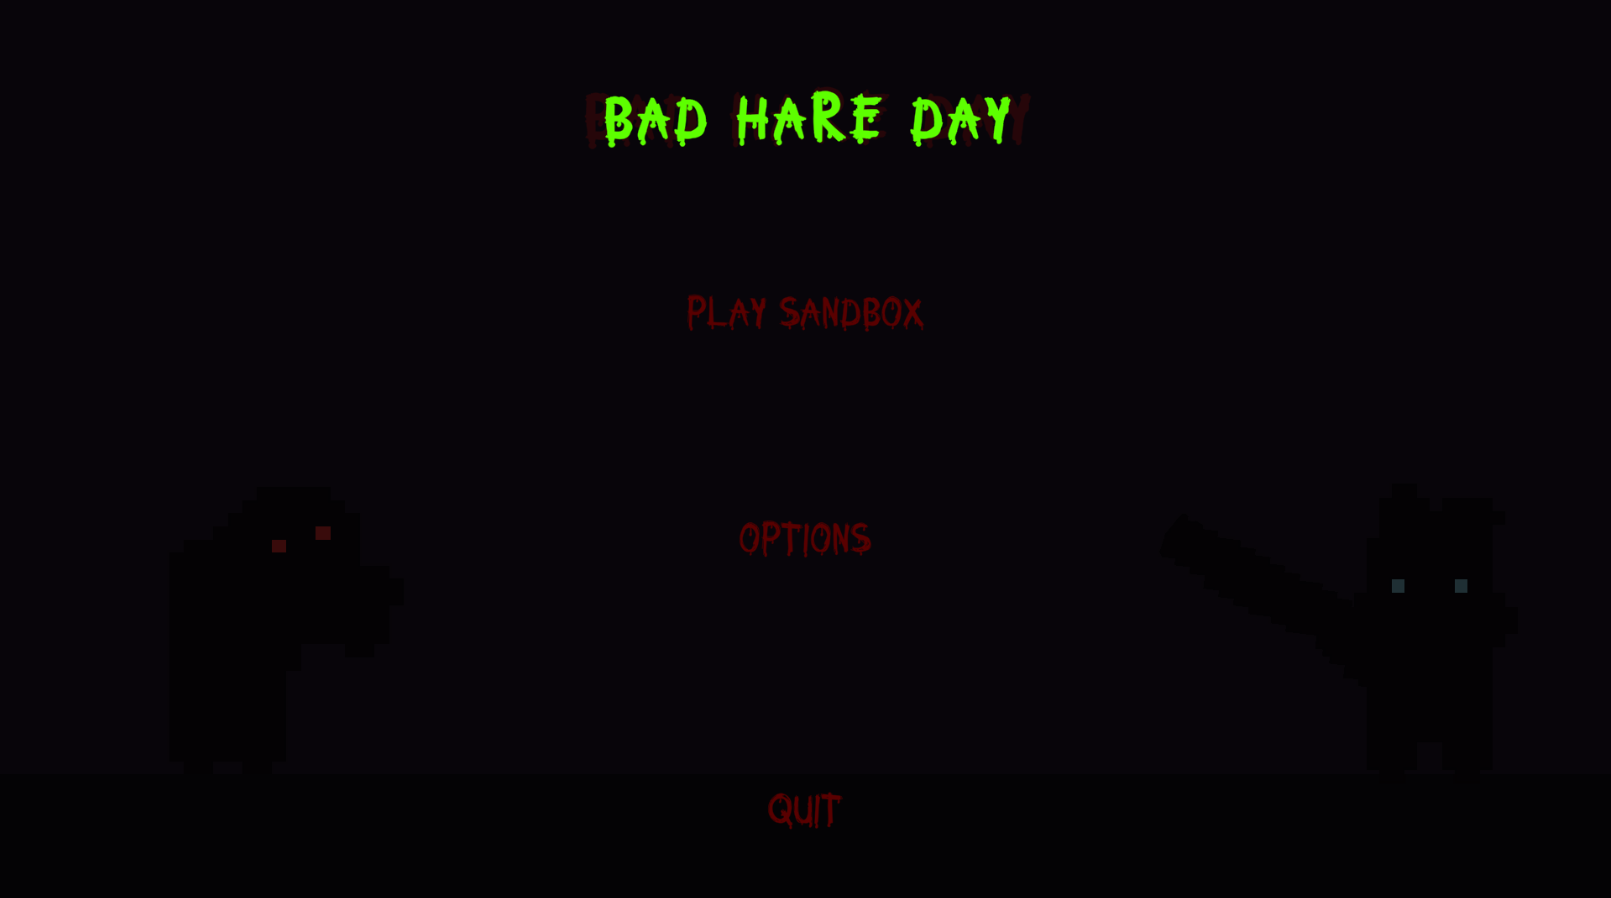 BAD HARE DAY